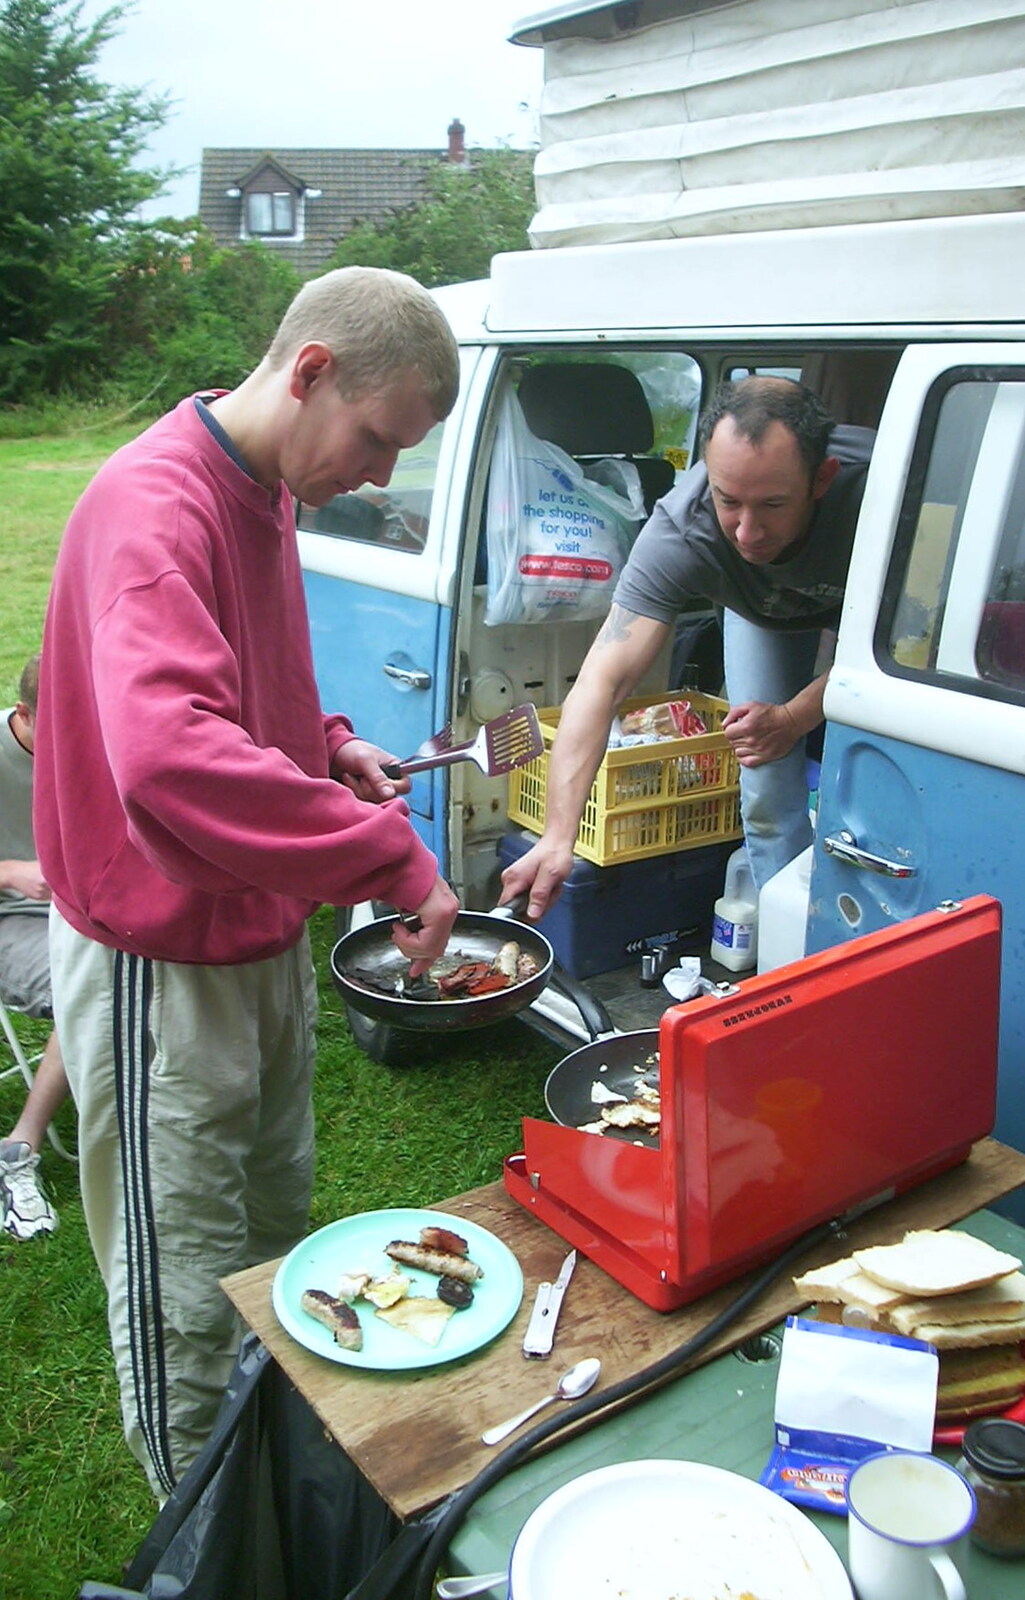 A BSCC Splinter Group Camping Weekend, Theberton, Suffolk - 11th August 2002: Bill's doing the whole Full English